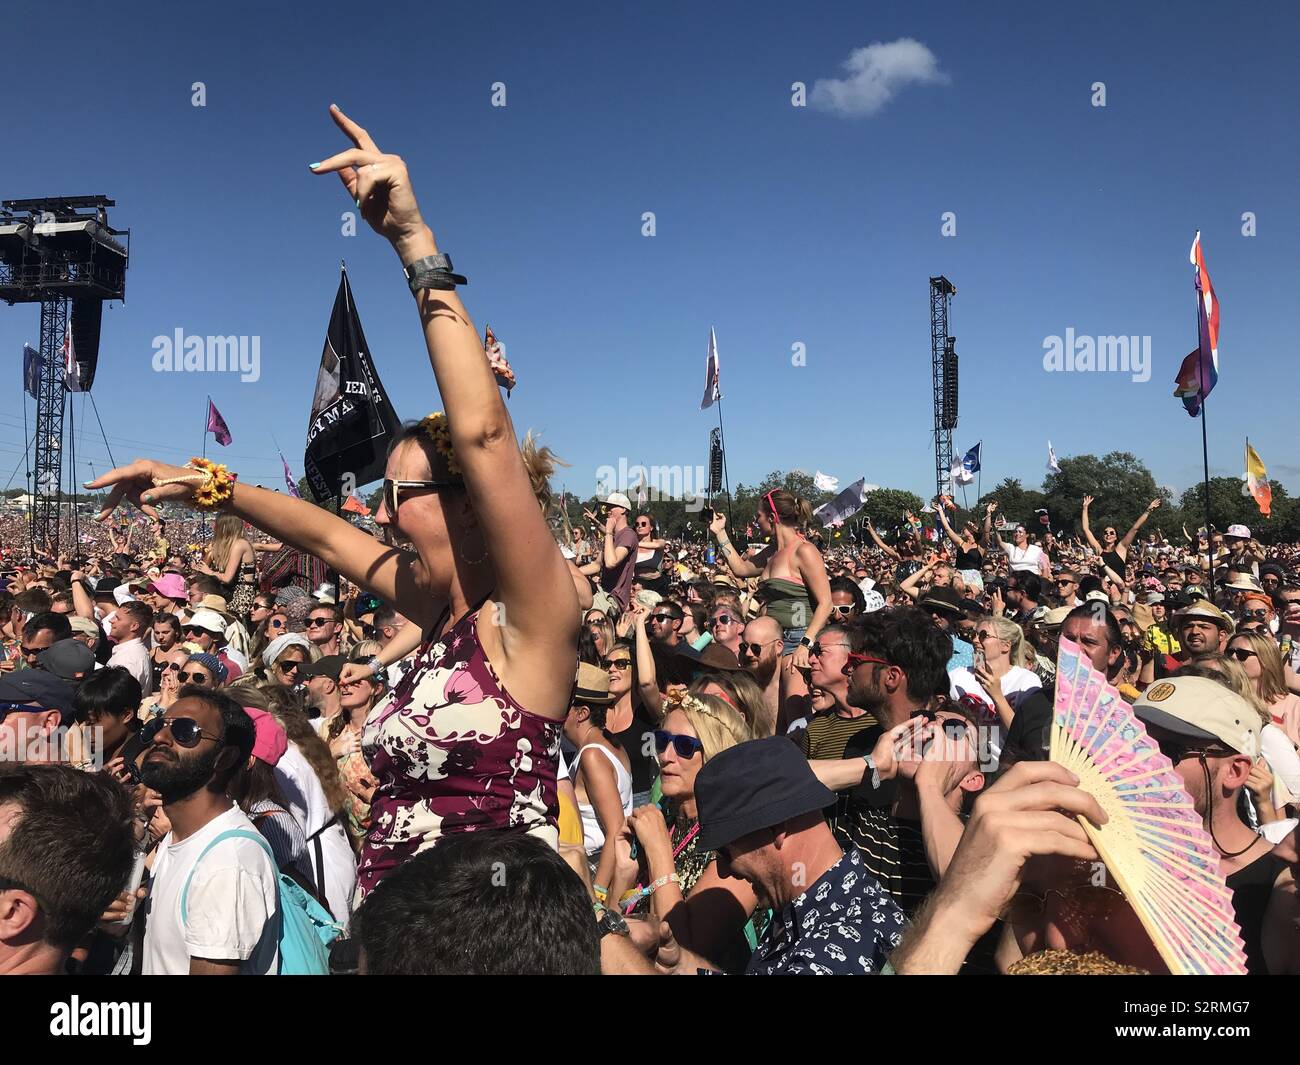 A huge crowd enjoying the set played by Kylie Minogue at the Glastonbury Festival 2019 Stock Photo